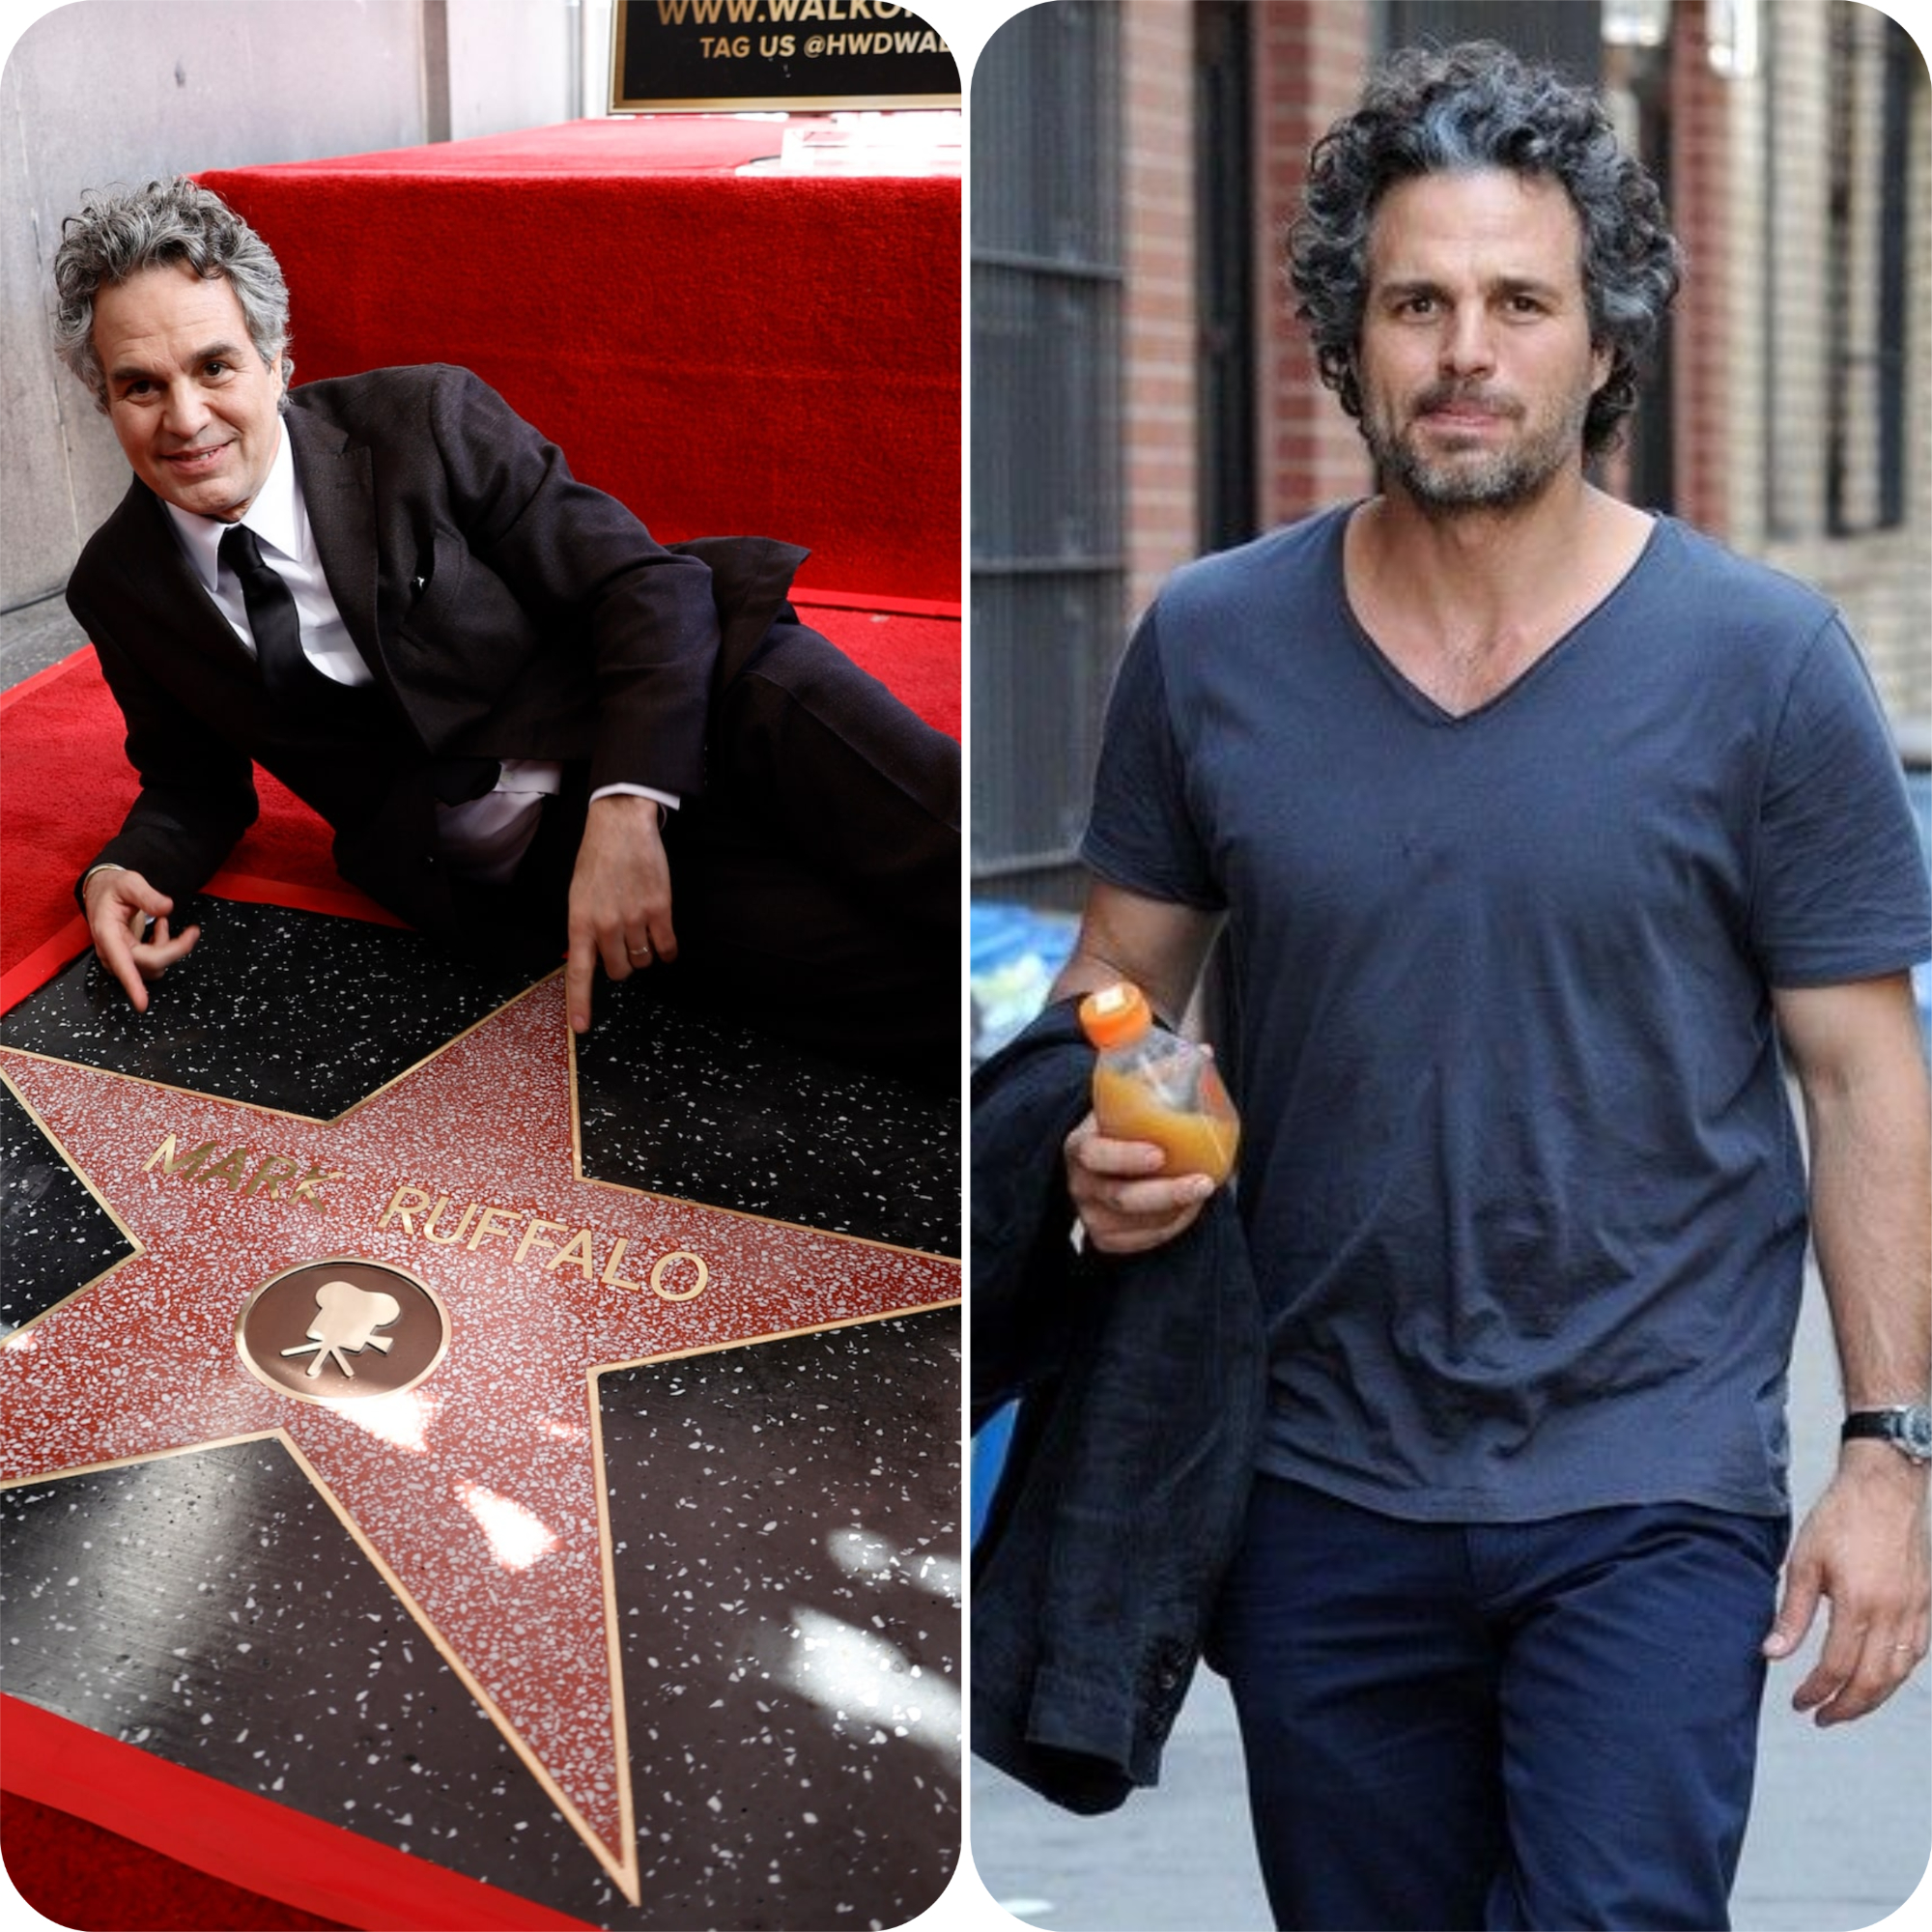 Mark Ruffalo was honored with a star on the Hollywood Walk of Fame